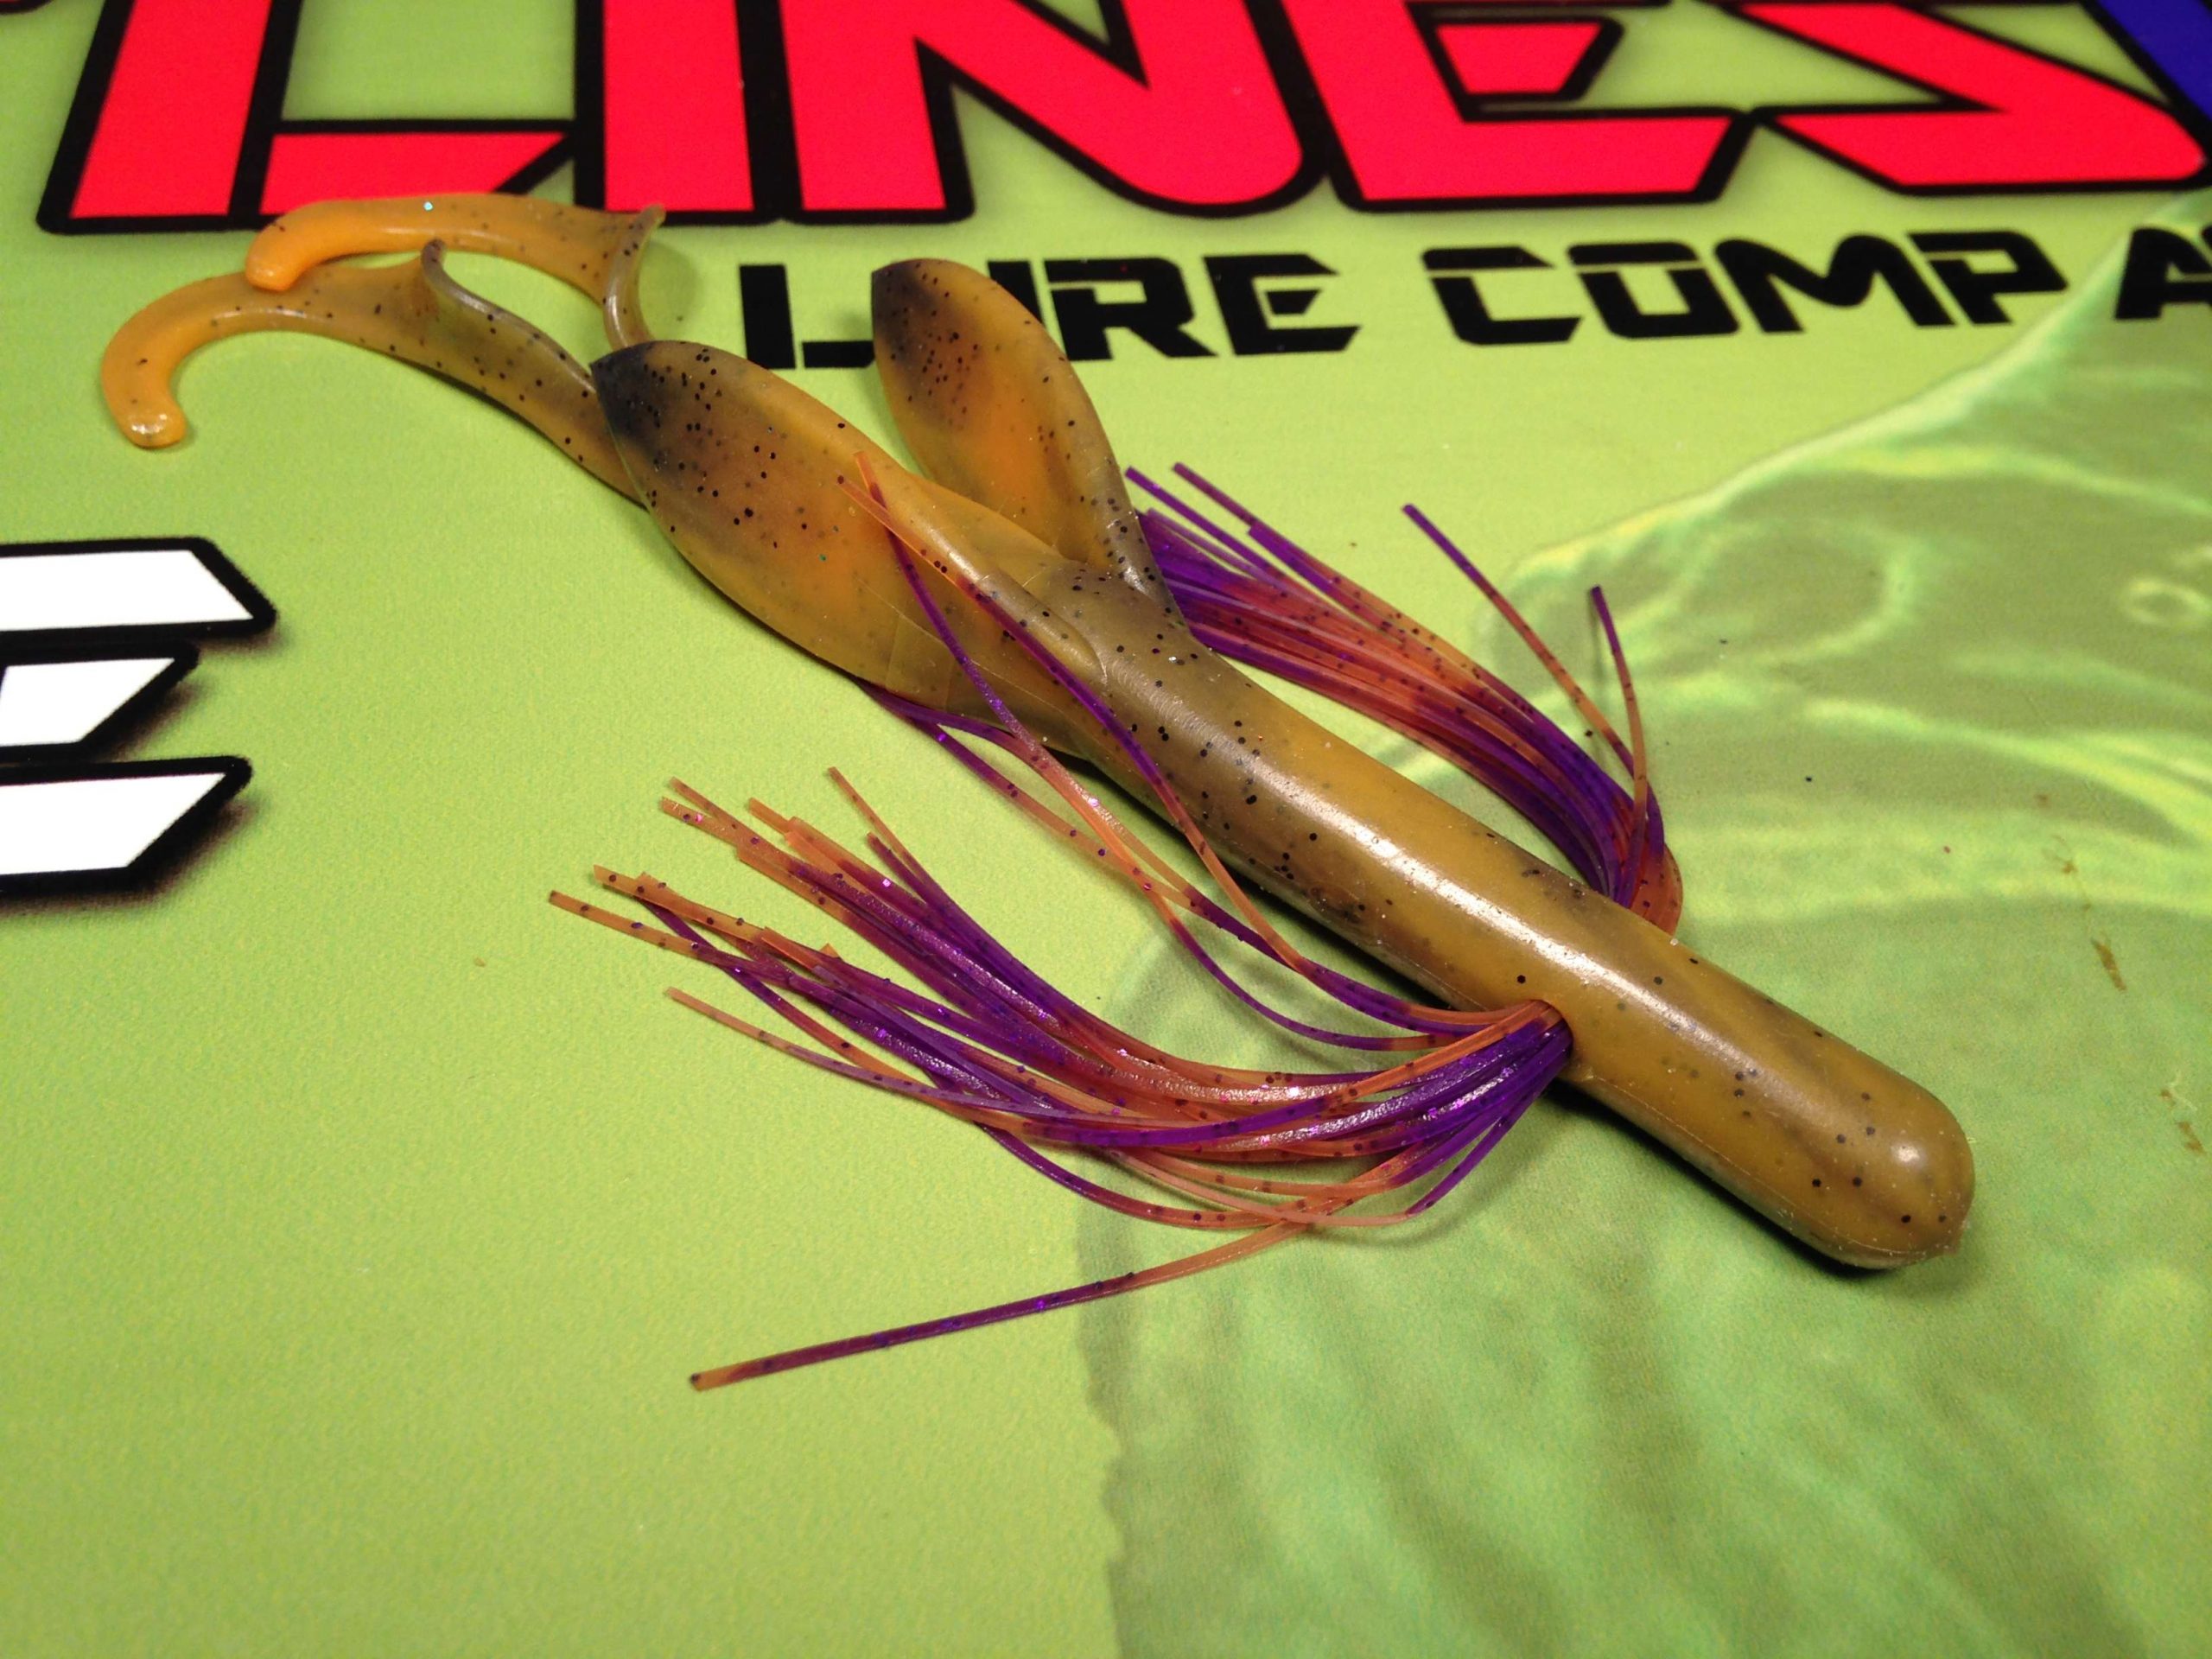 <b>Tightlines UV</b><br>
Whisker Bait "Hog Rig"<br>
The popular Whisker Bait is now available in a new profile, the Hog Rig. Available in 20 colors and 2 sizes (4" and 6") so you're sure to find the right combination.